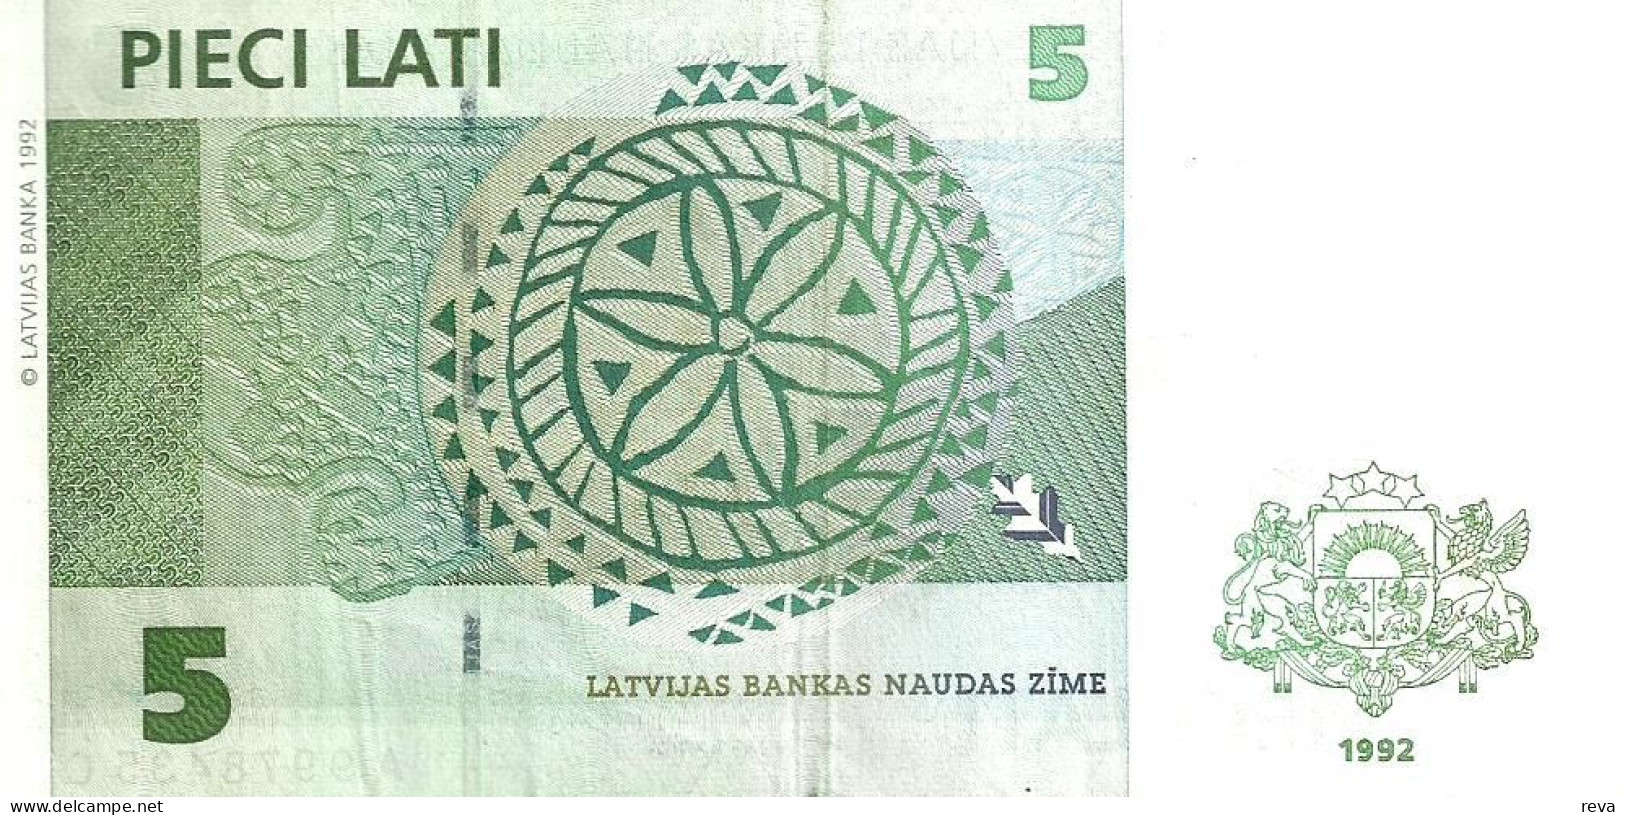 LATVIA  5 LATI GREEN TREE FRONT & ABSTRACT DESING BACK DATED 1992 VF+/VF+ P.43a READ DESCRIPTION !! - Lettonie